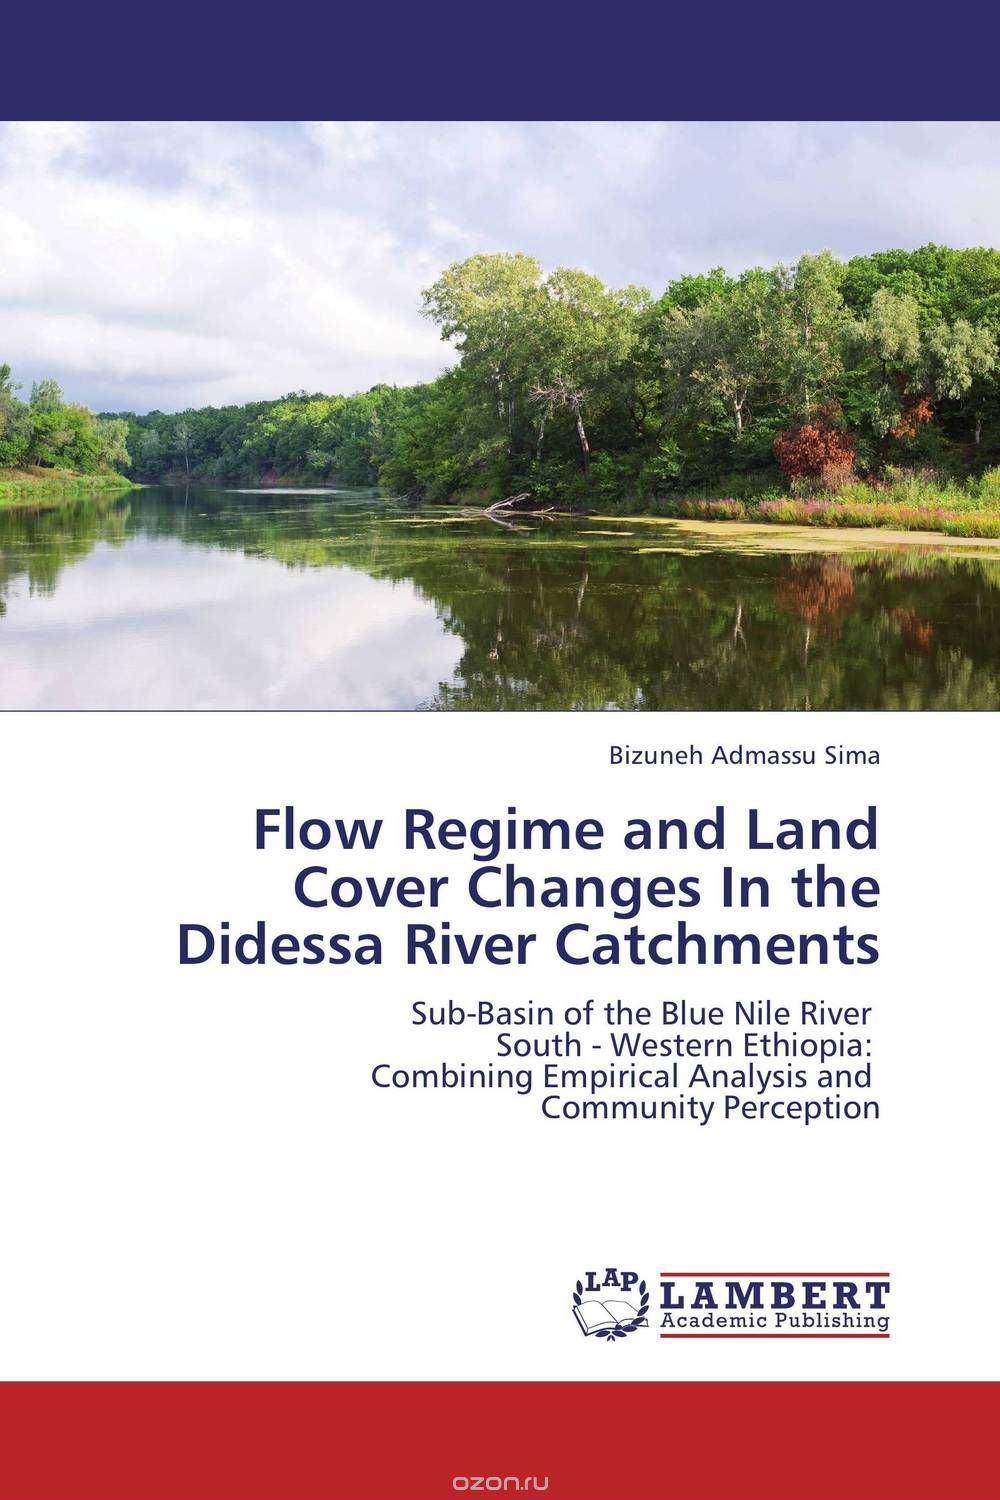 Flow Regime and Land Cover Changes  In the Didessa River Catchments